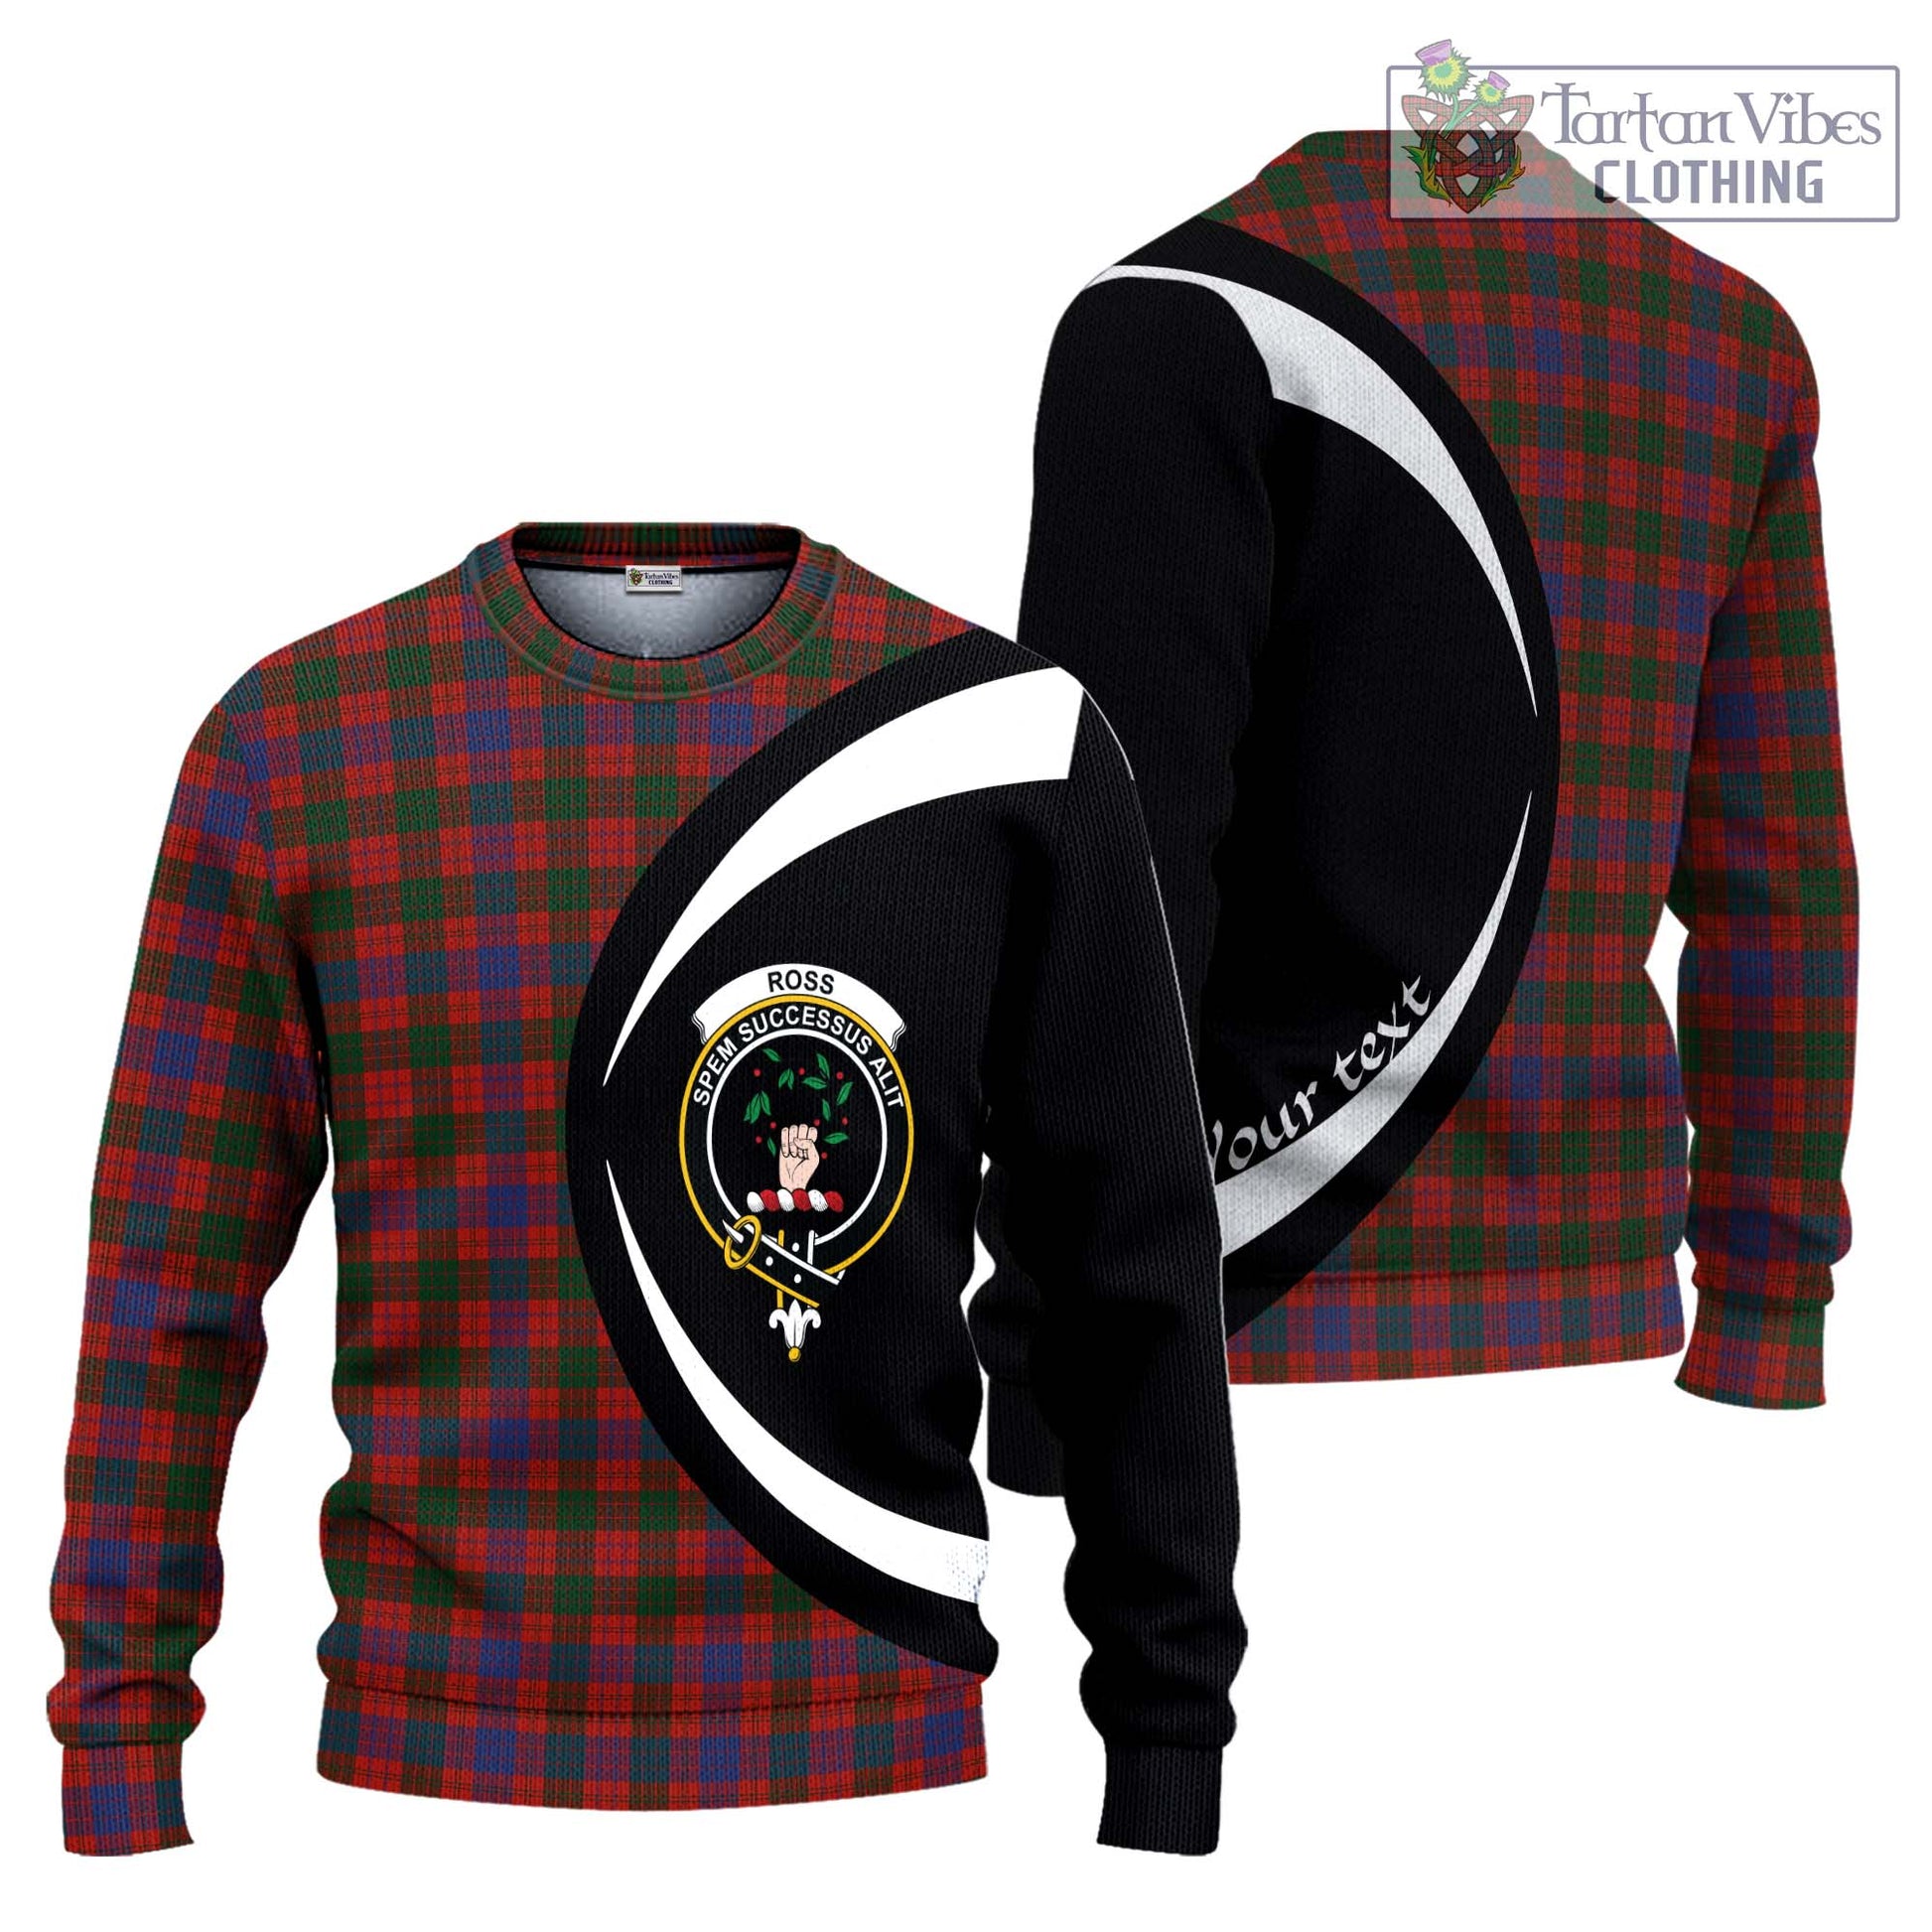 Tartan Vibes Clothing Ross Tartan Knitted Sweater with Family Crest Circle Style